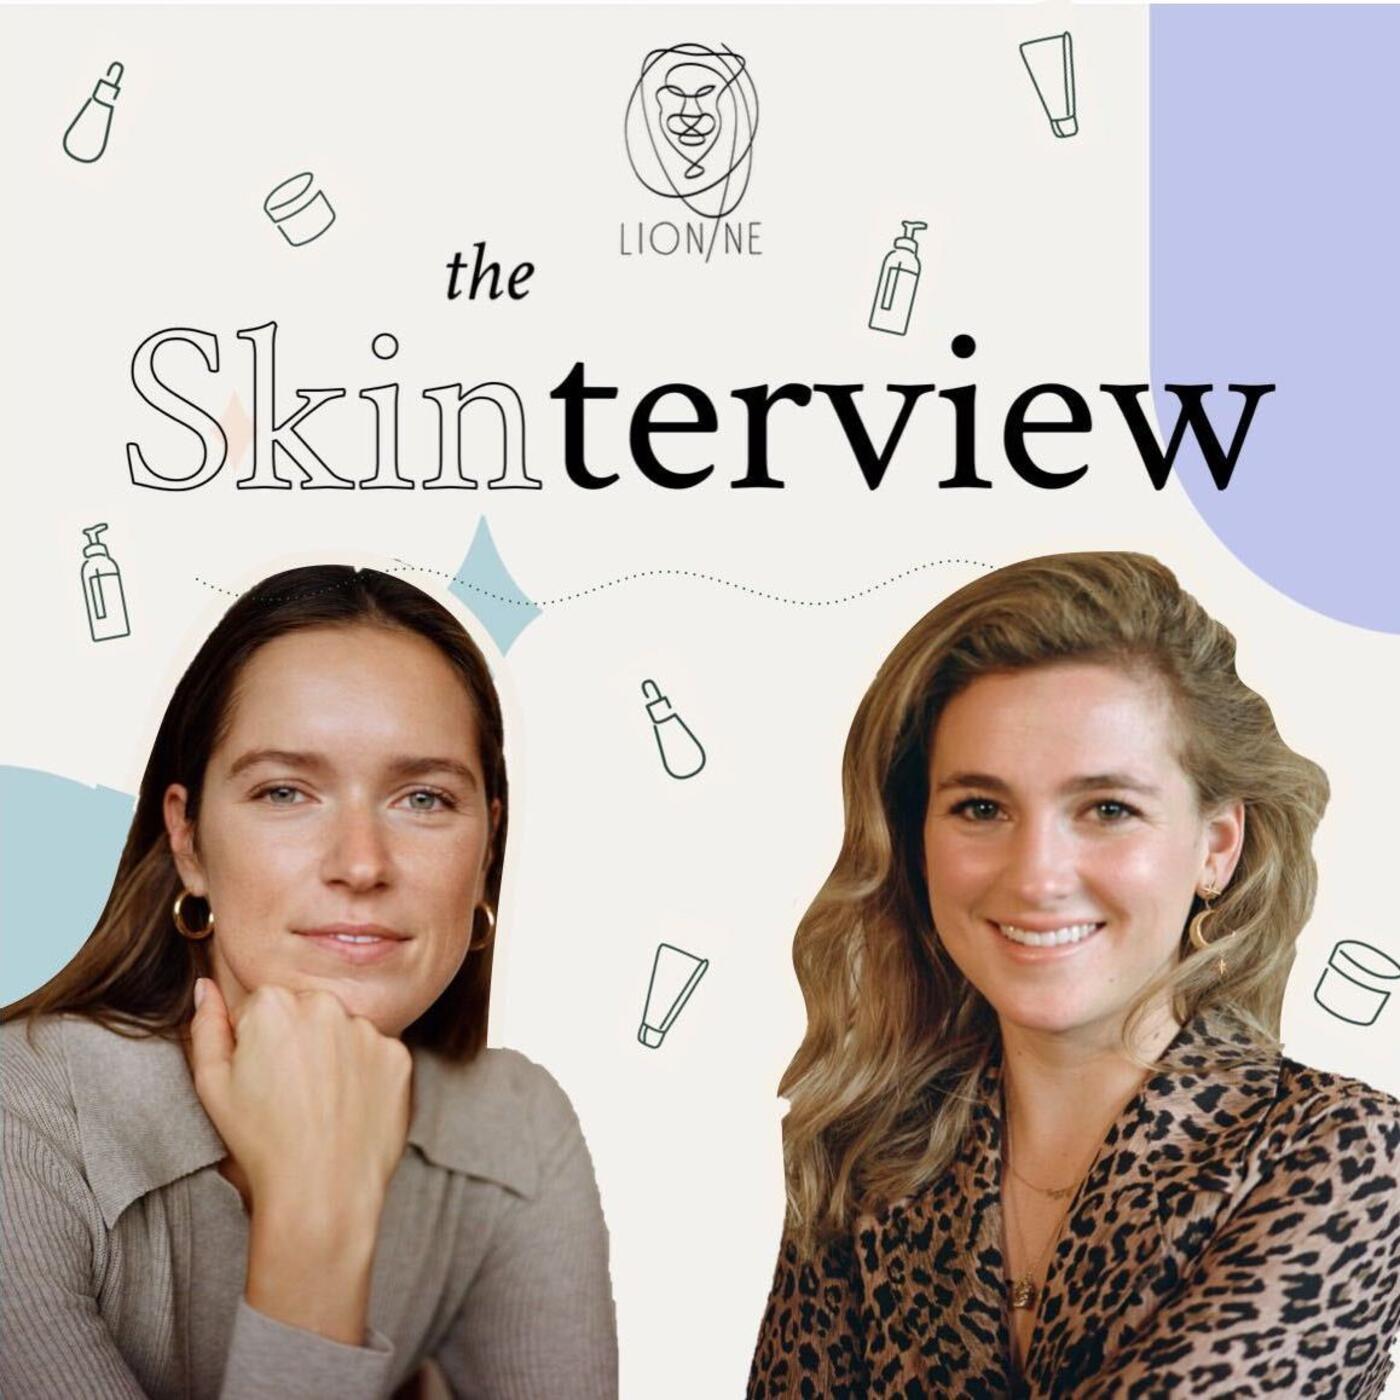 The Skinterview